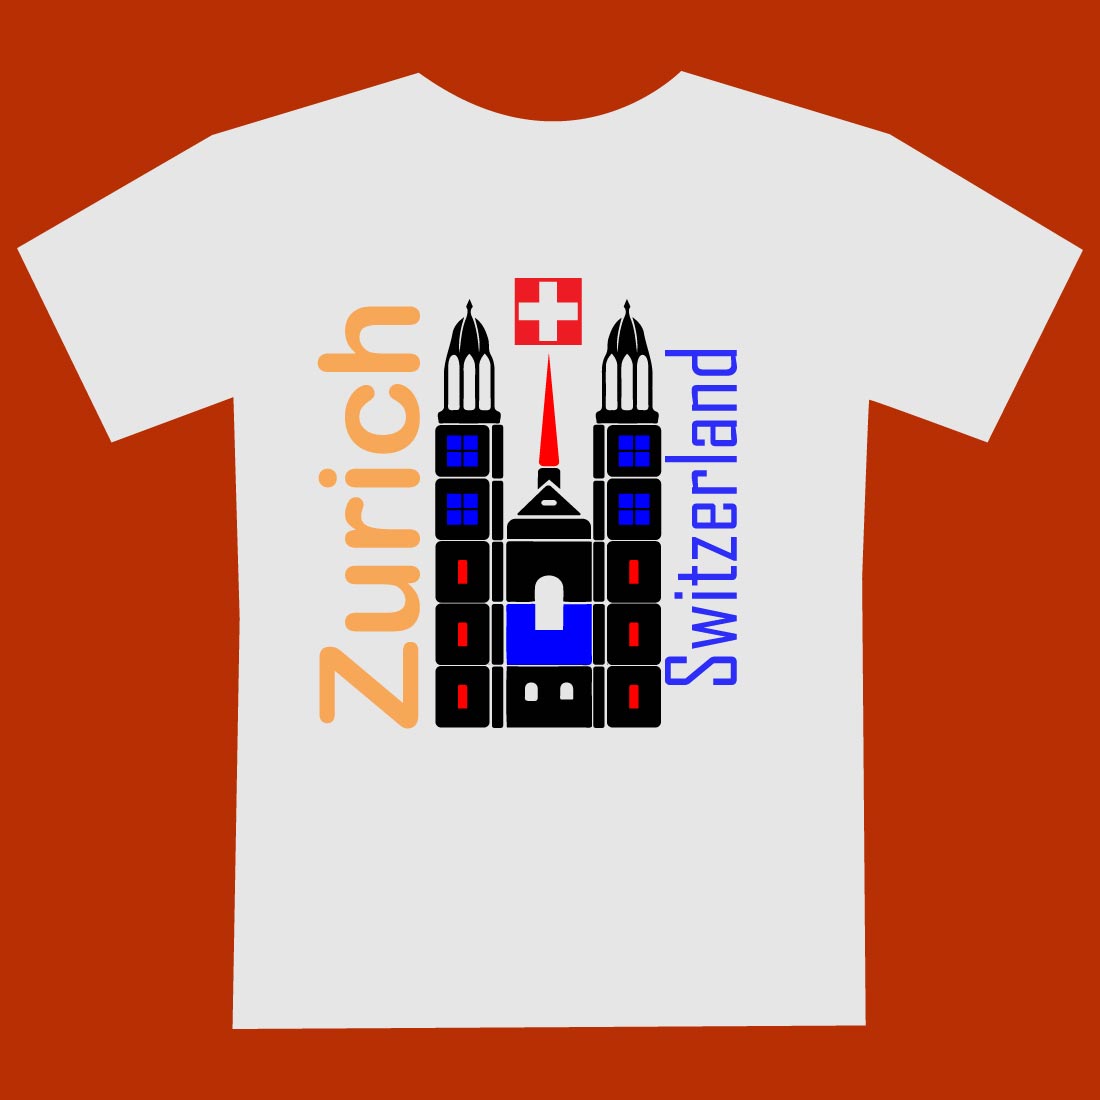 For a festival in Zurich, Switzerland, you might want your T-shirt design to capture the essence of the city and the event cover image.